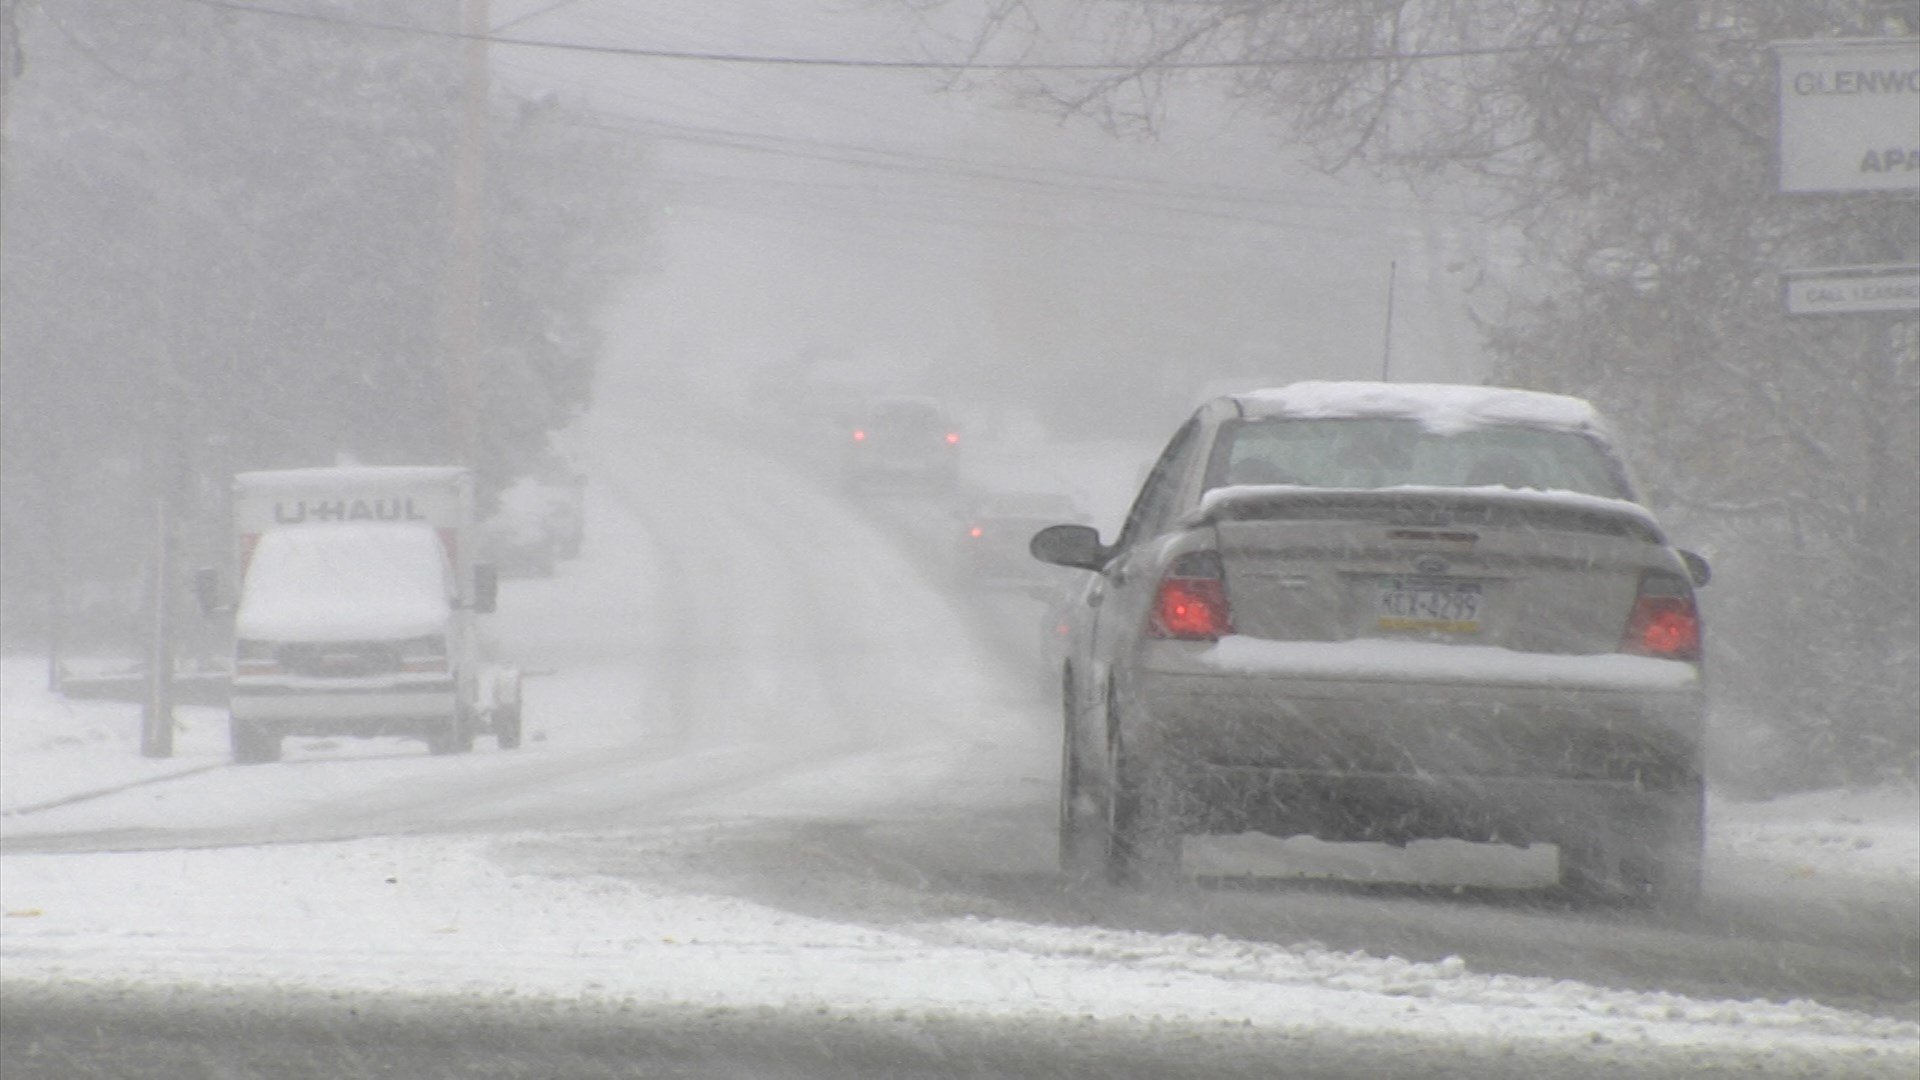 PennDOT Preparing for Winter Conditions